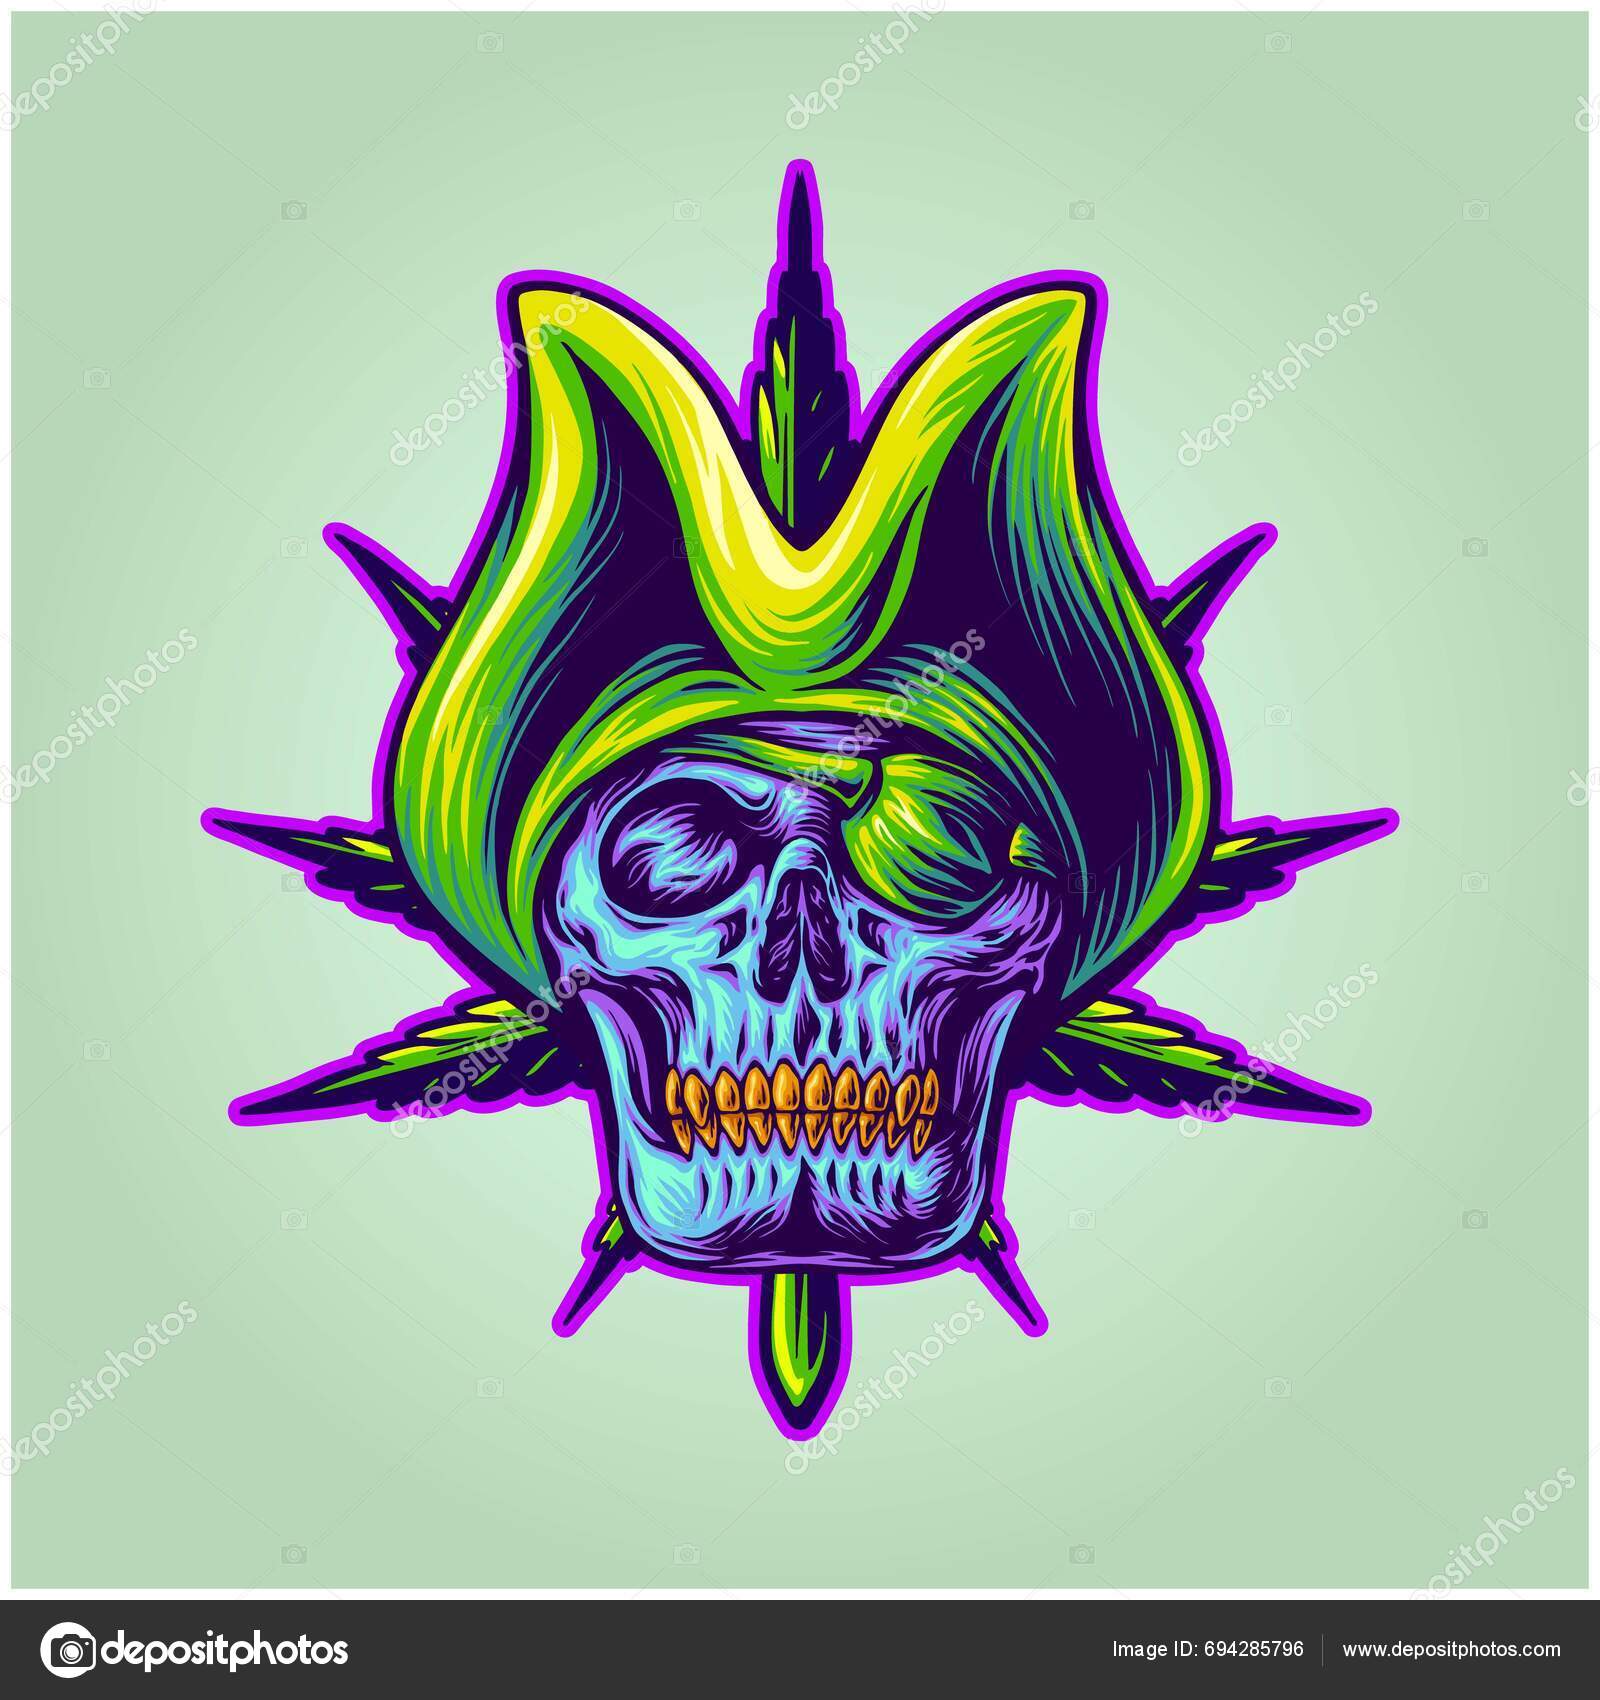 Cannabis Leaf Pirate Skull Ornament Vector Illustrations Your Work Logo ...